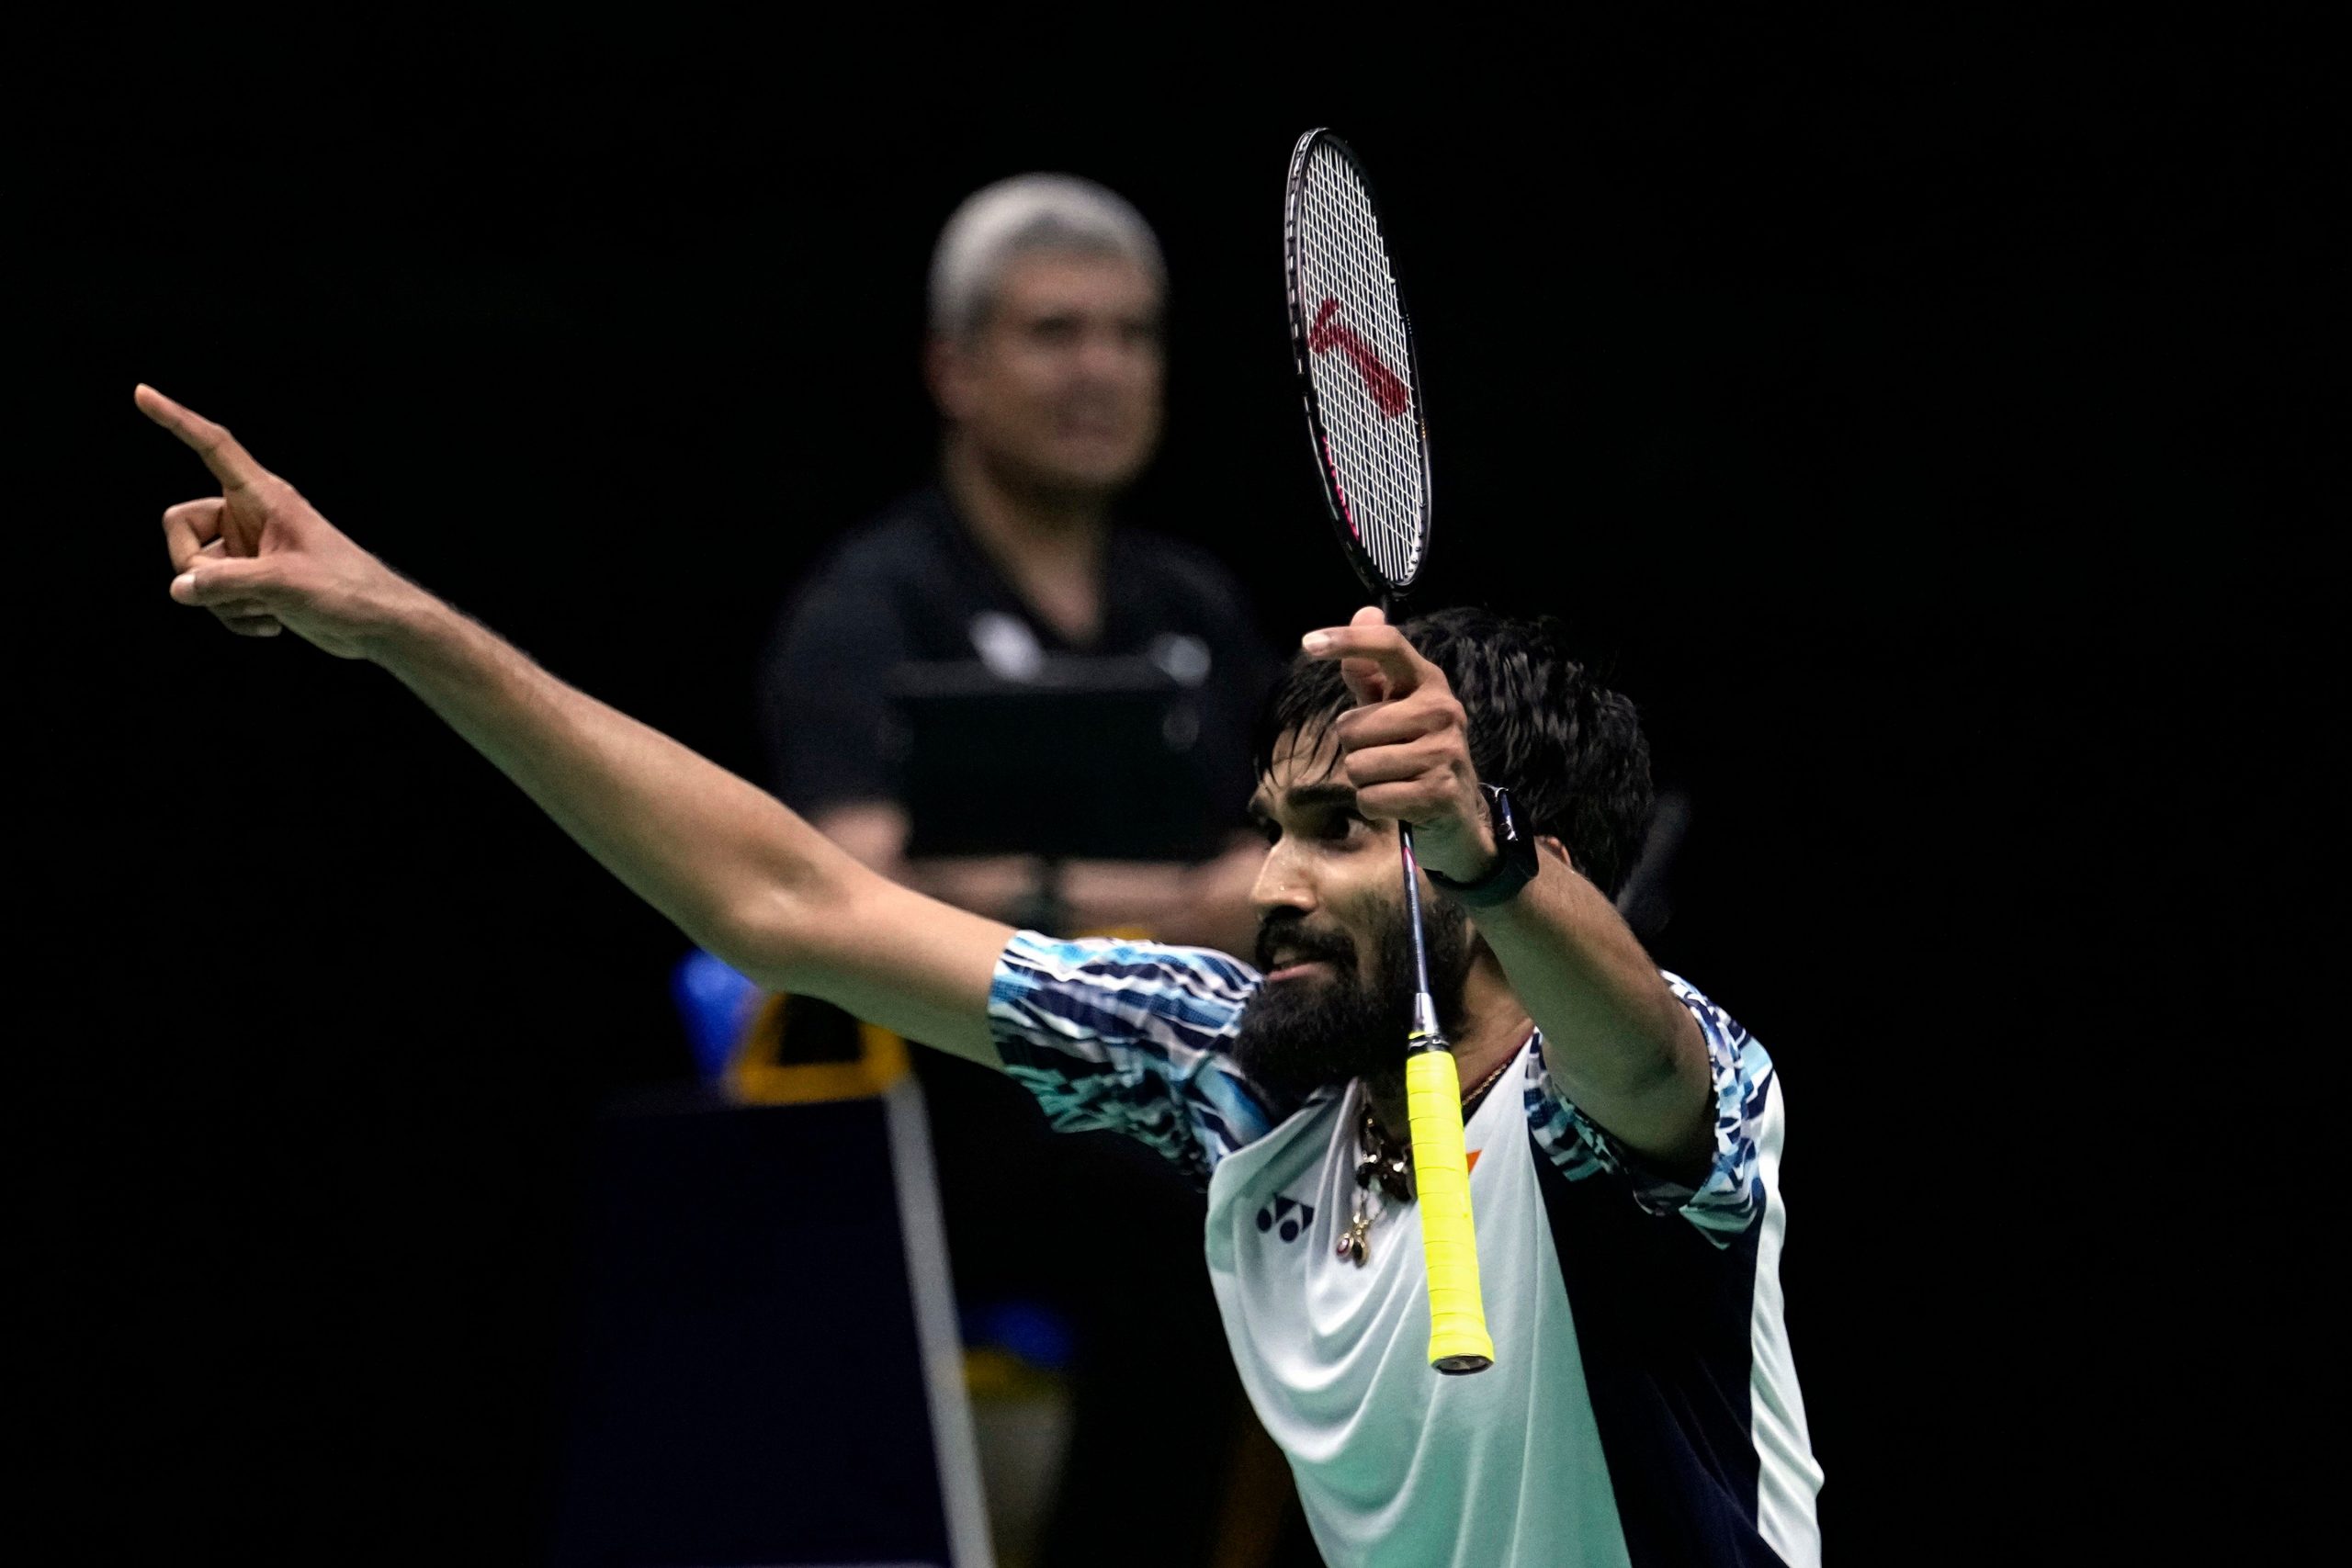 India’s Thomas Cup winning team stepped up when it mattered: Kidambi Srikanth